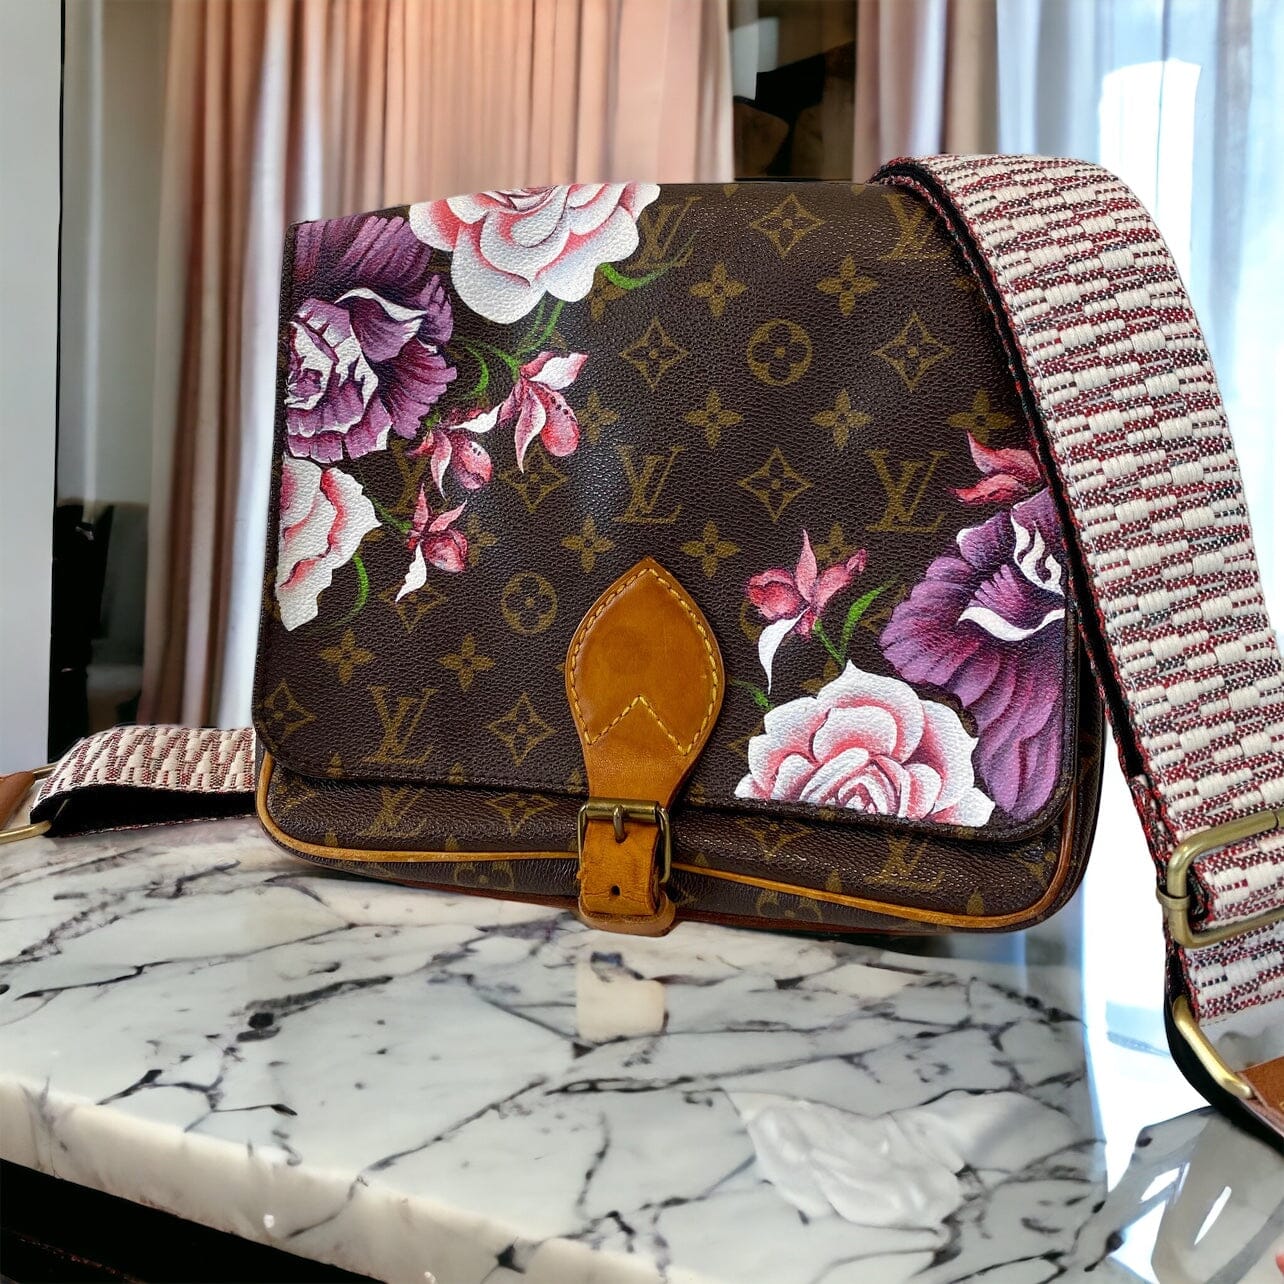 The Monogram Flower Opens Its Petals in the New Louis Vuitton